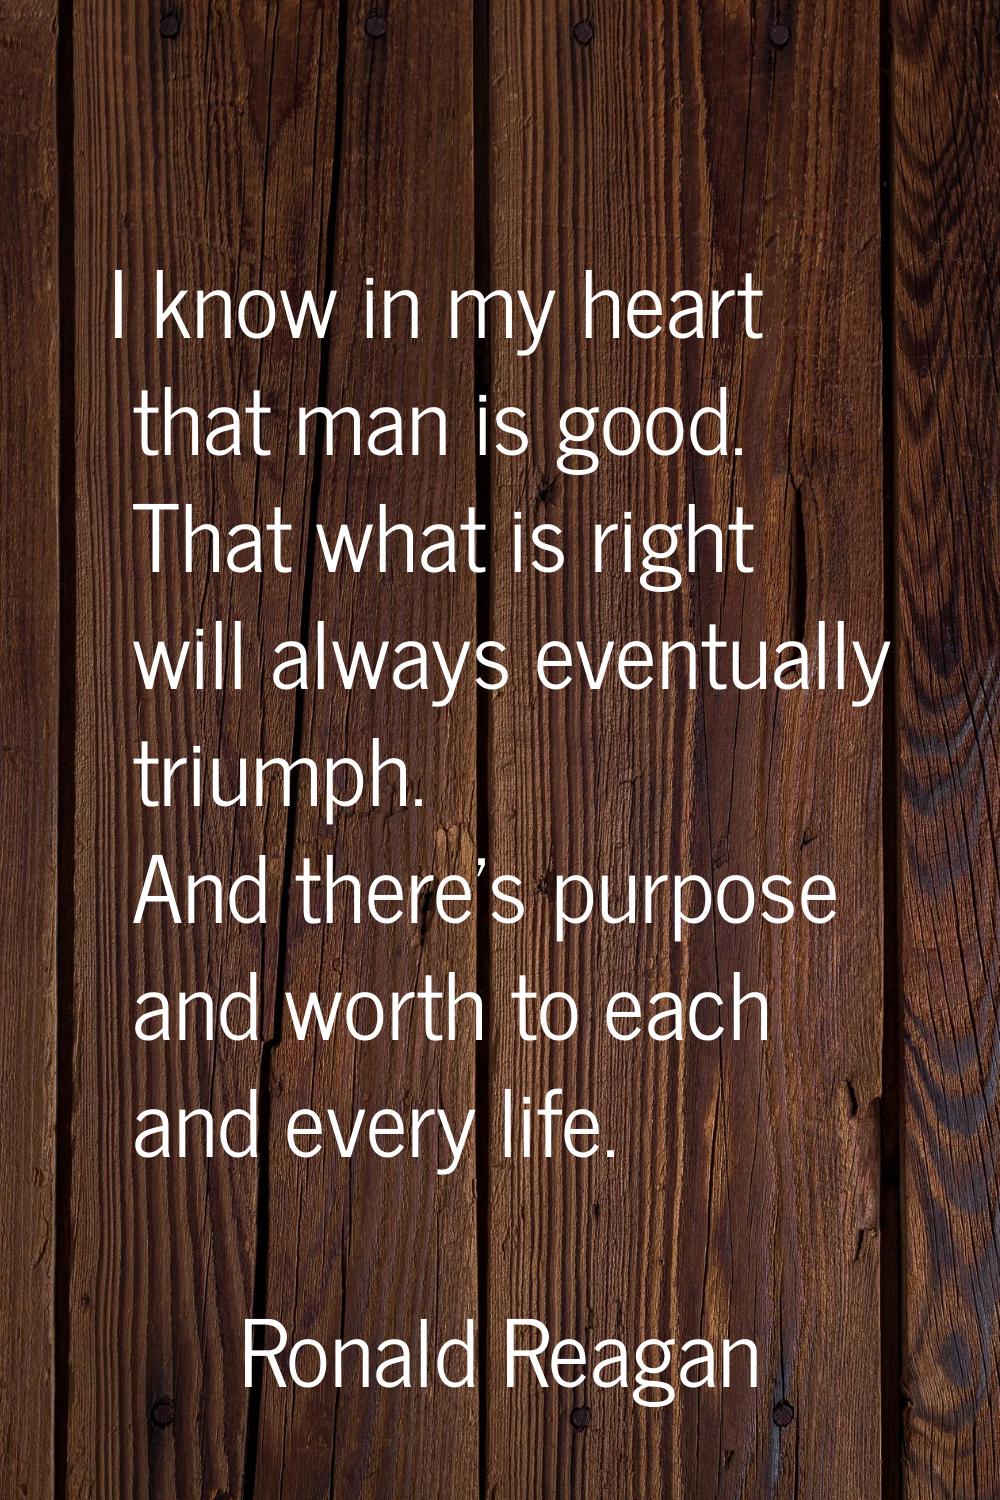 I know in my heart that man is good. That what is right will always eventually triumph. And there's